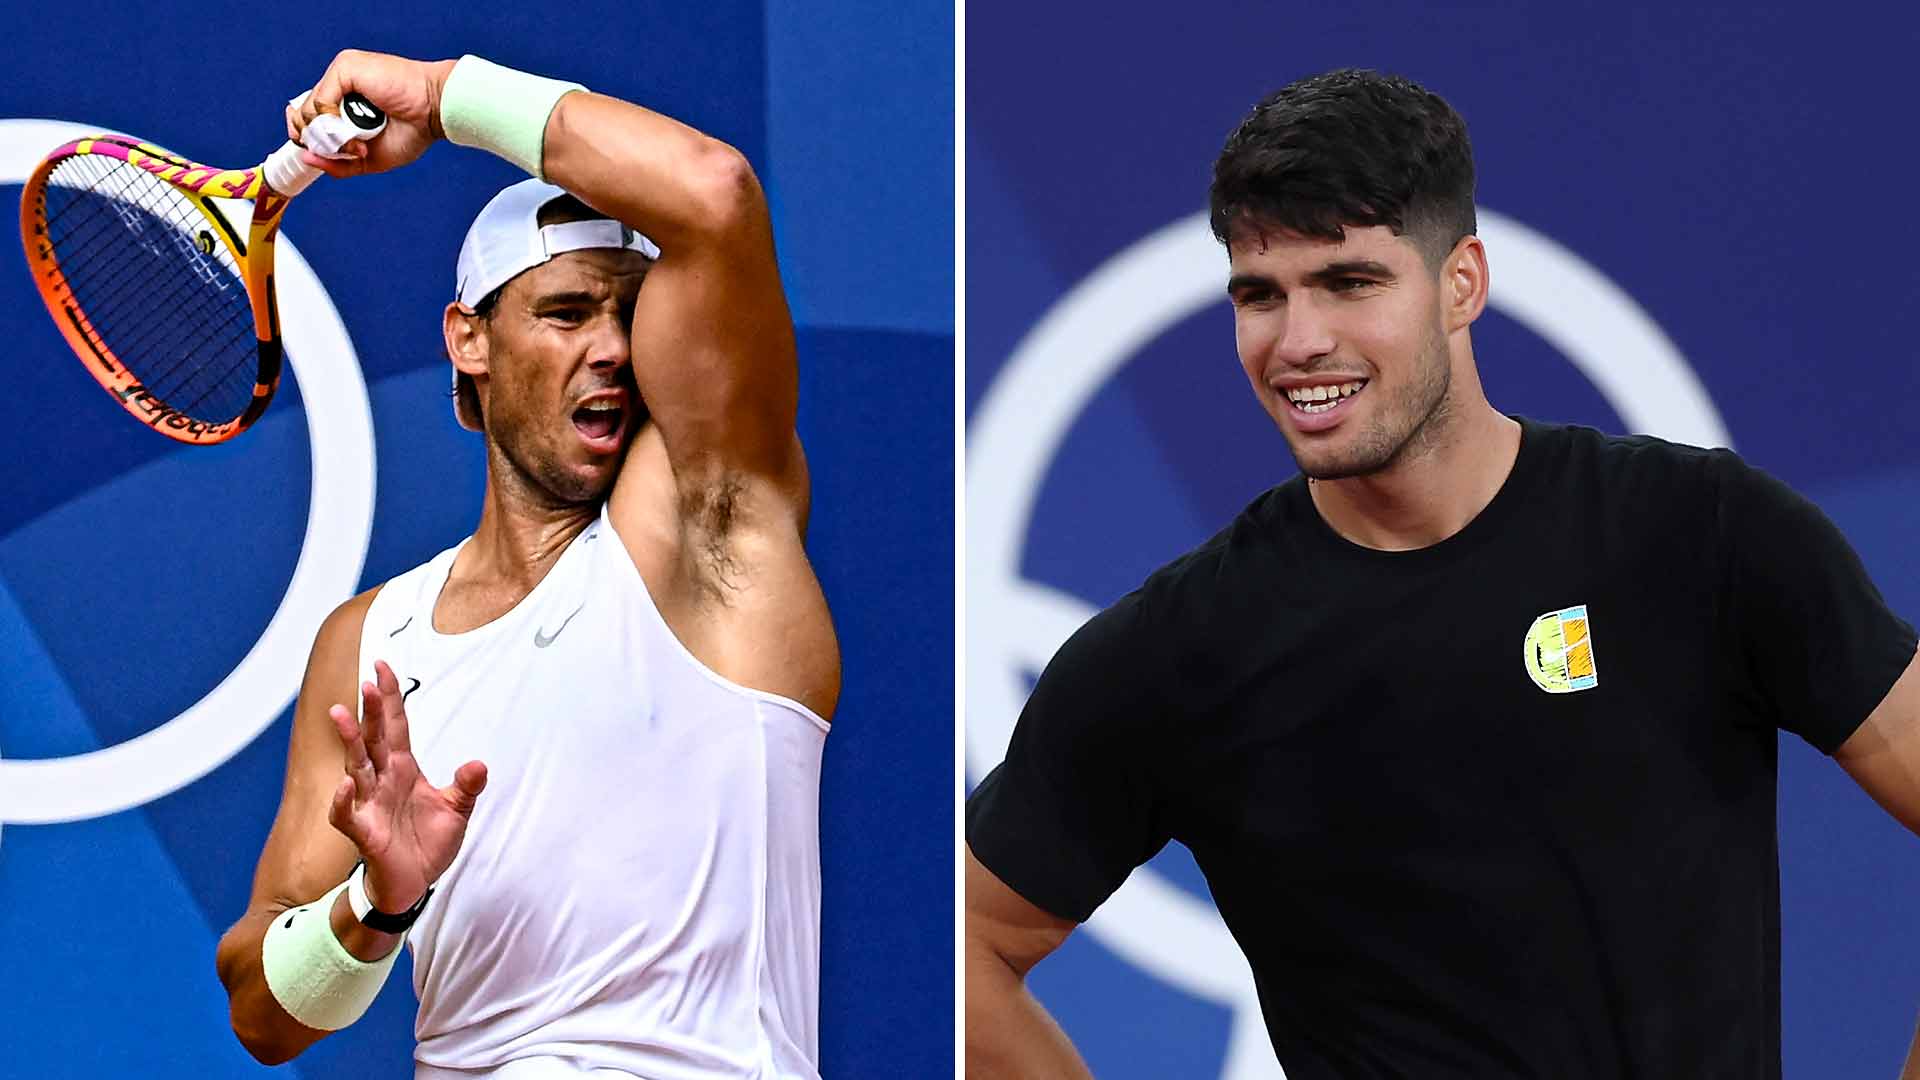 Rafael Nadal and Carlos Alcaraz are in action on night one of the Olympic Tennis Event Saturday.